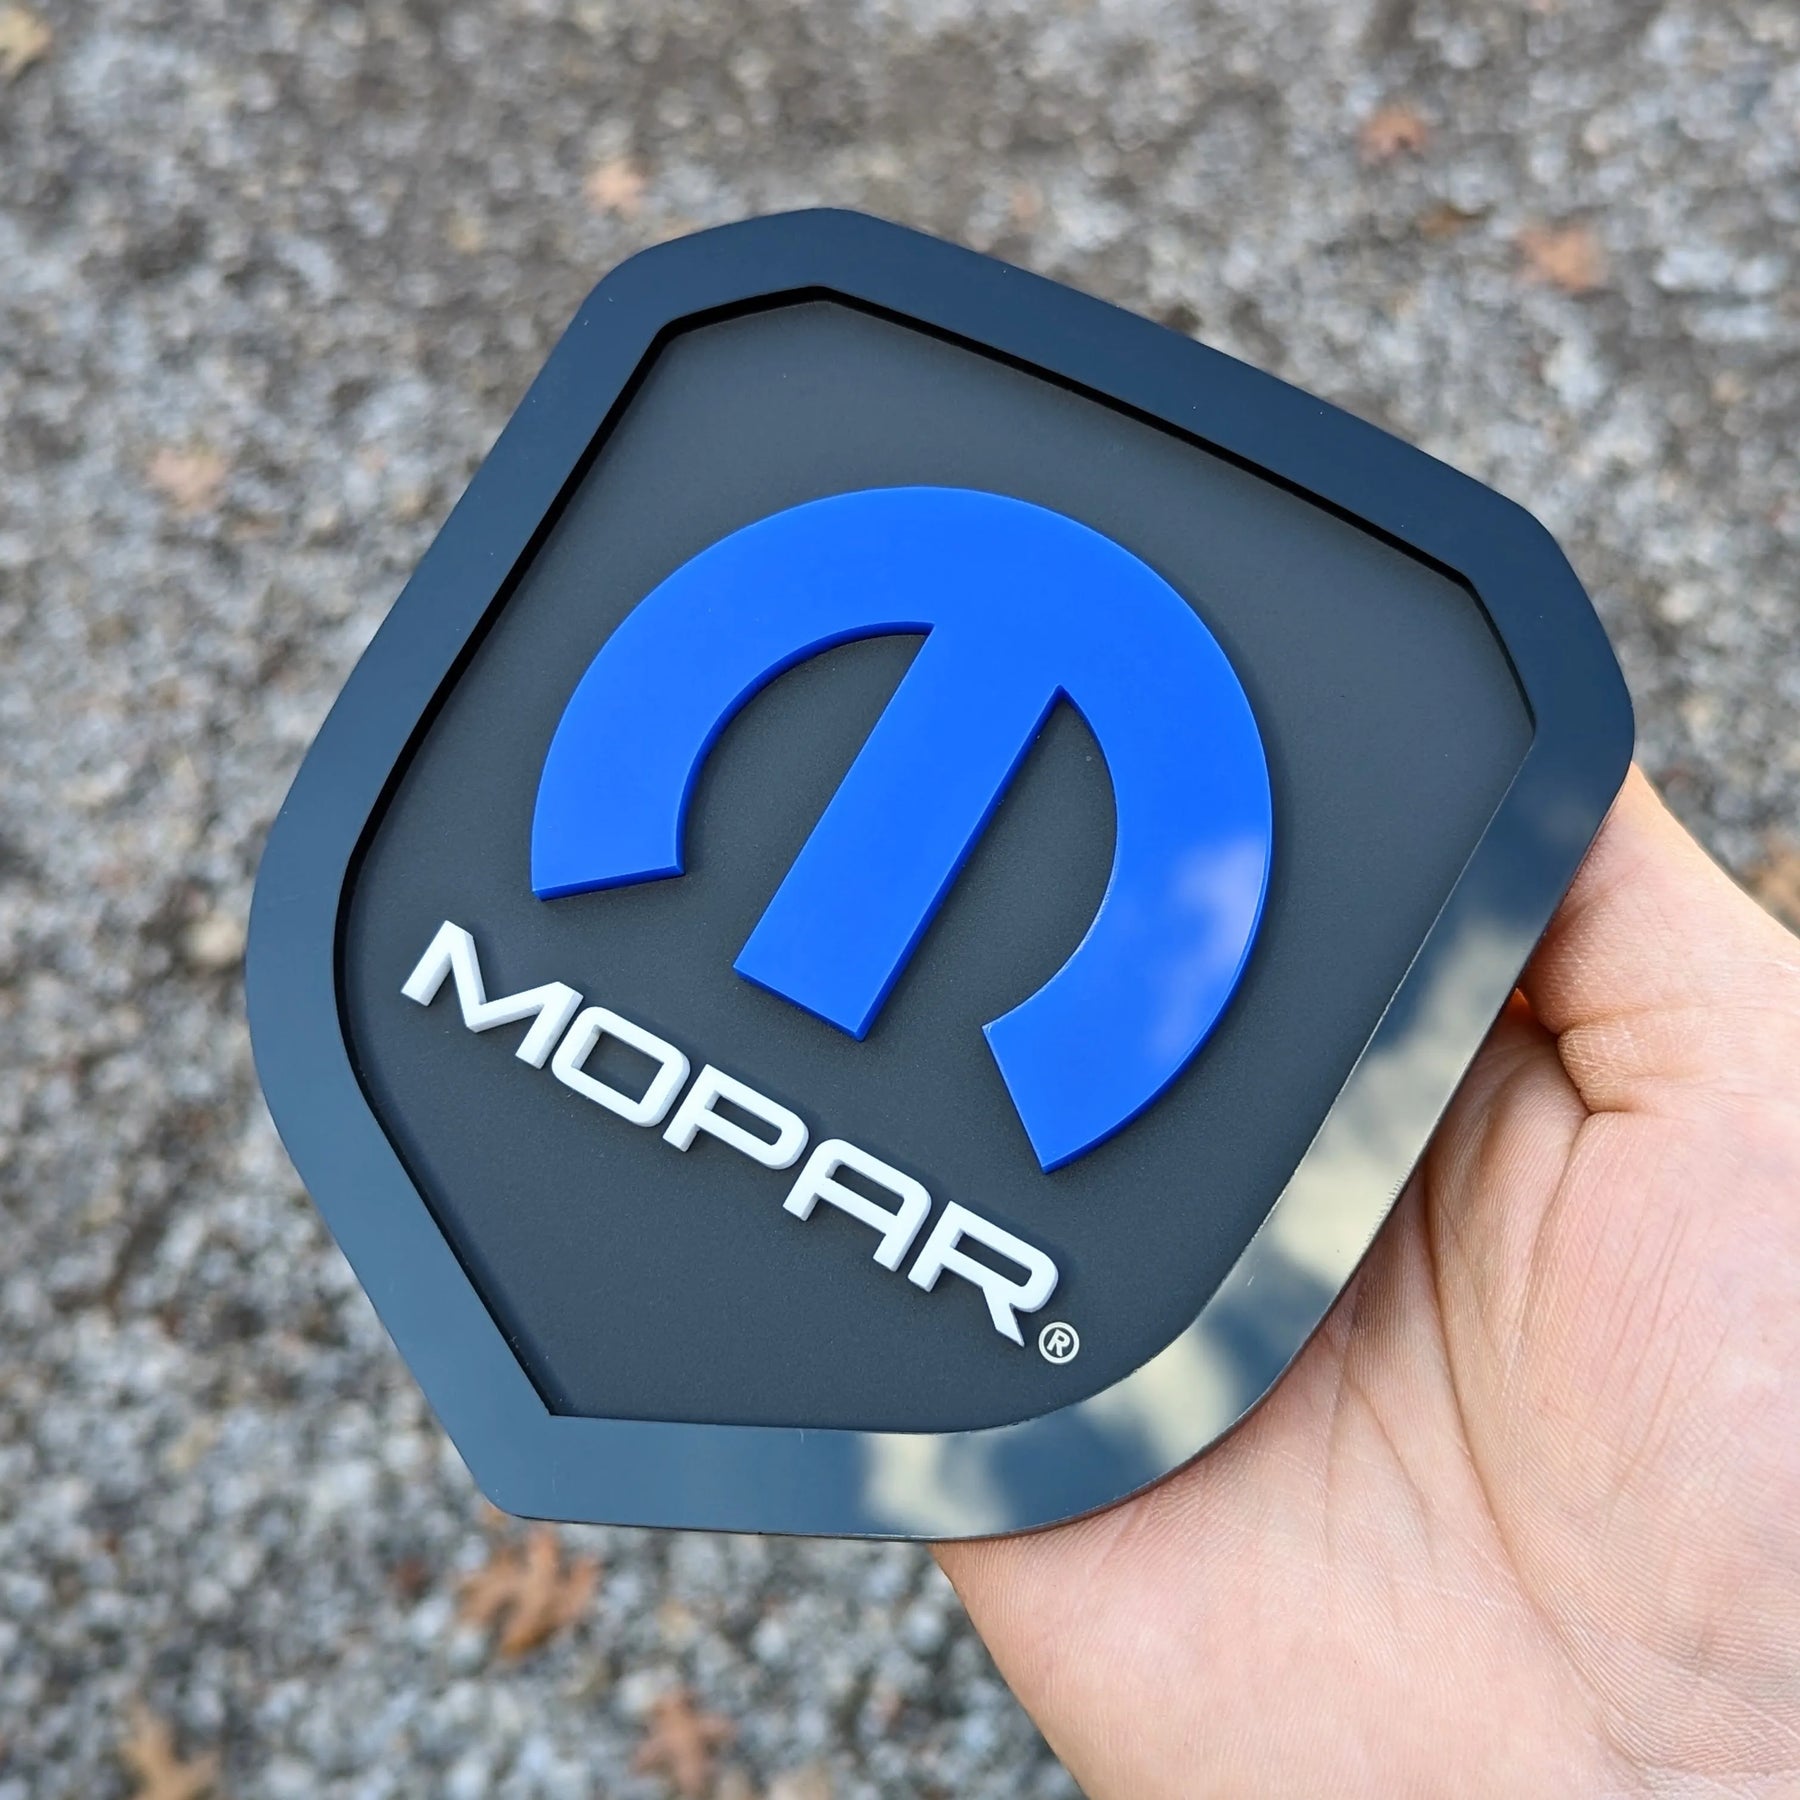 Mopar® Grille and Tailgate Badge Combo - Fits 2013-2018 RAM® - 1500, 2500, 3500 - Officially Licensed Product